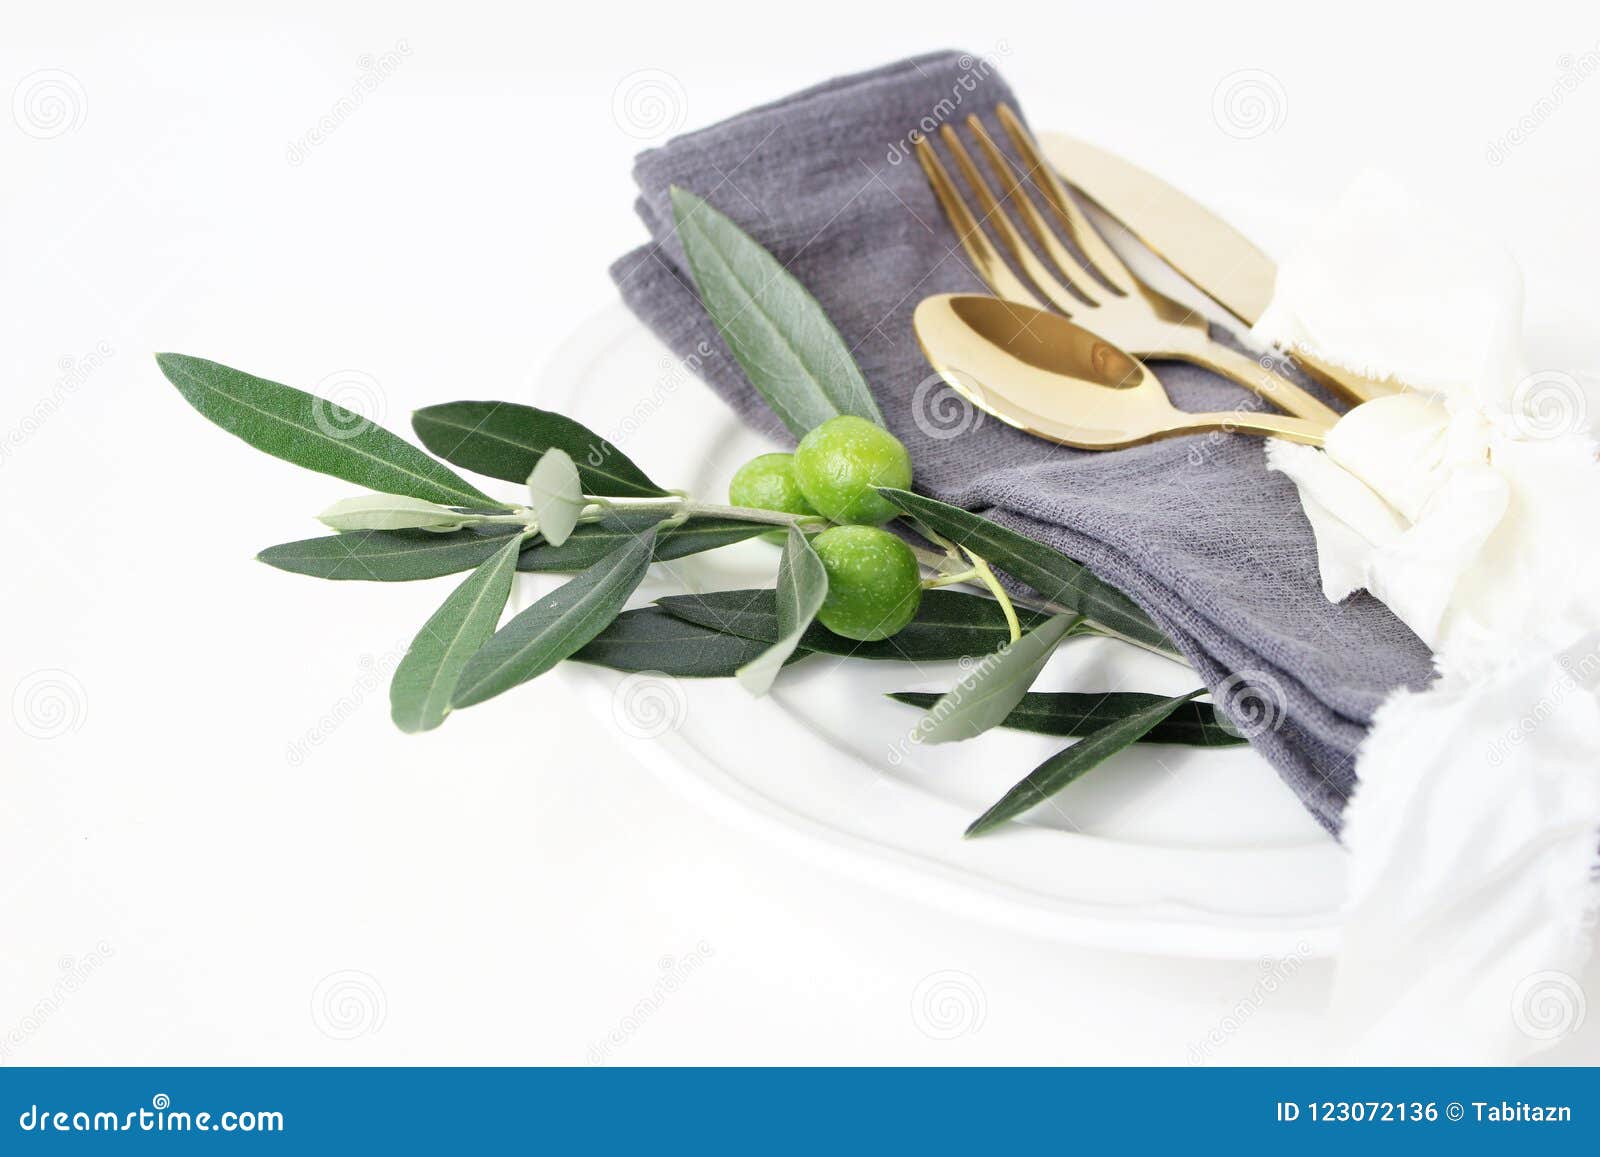 closeup of festive table summer setting with golden cutlery, olive branch, grey linen napkin, porcelain dinner plate and